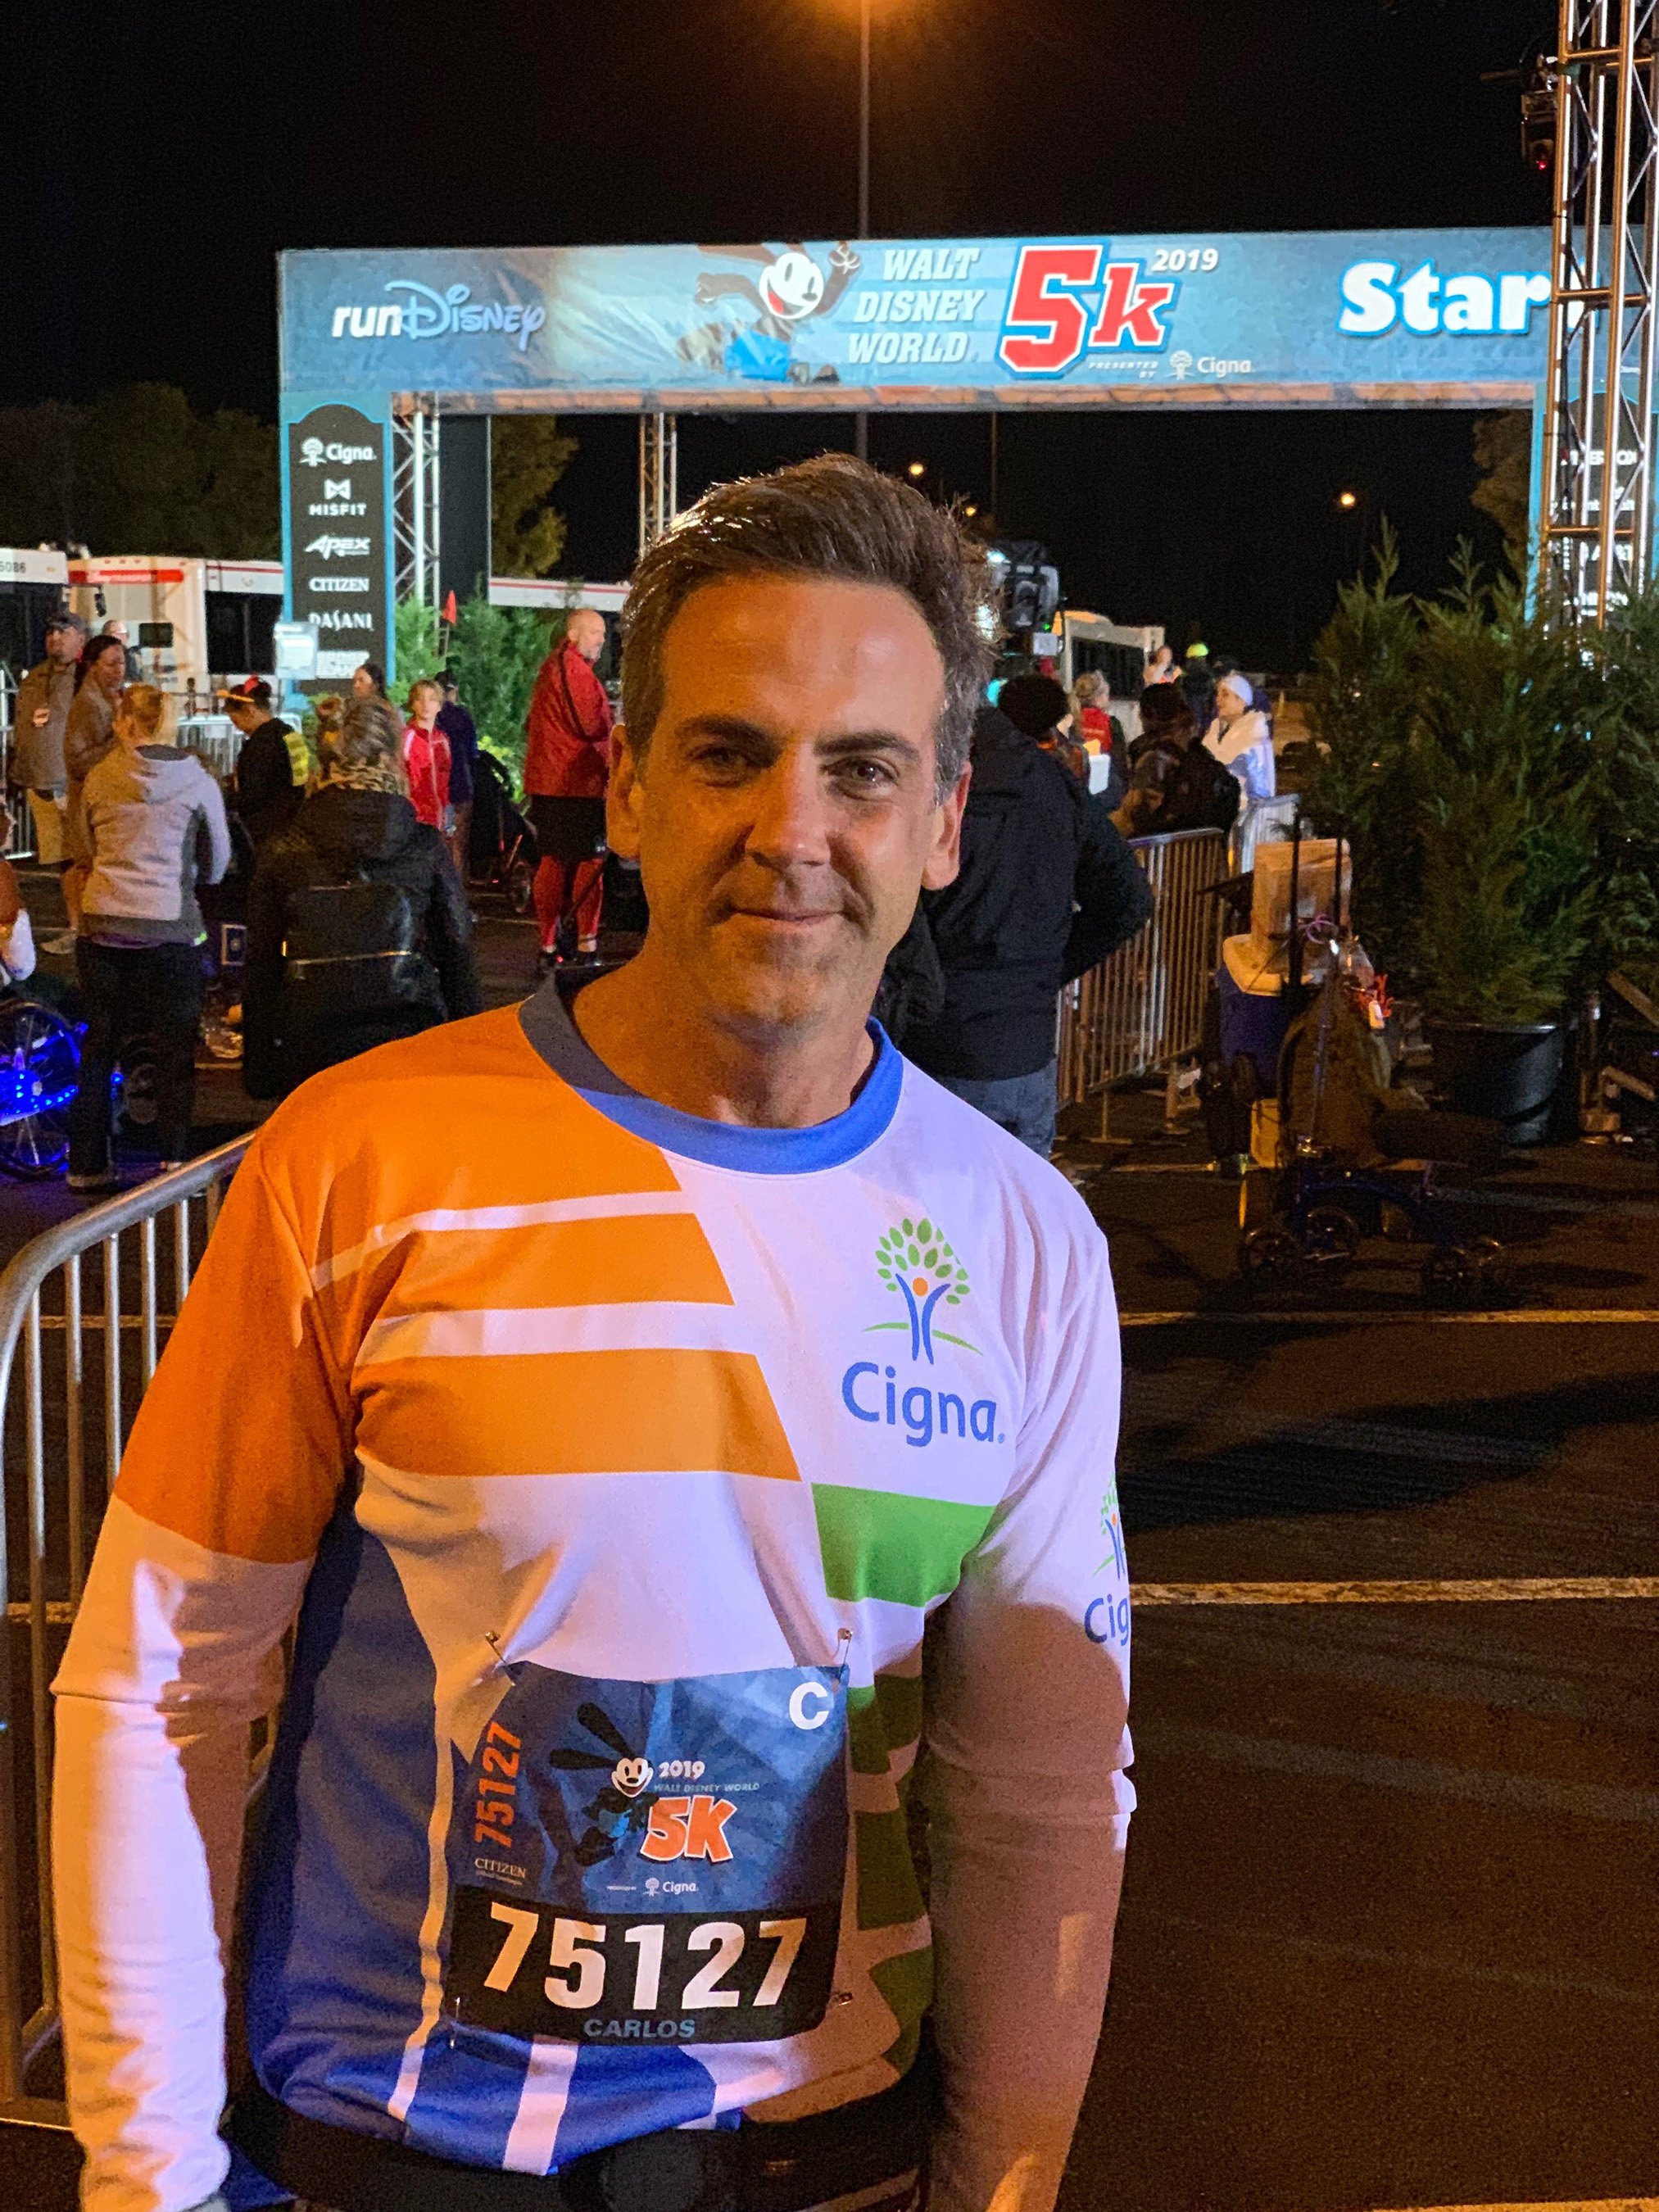 Renowned Latino actor Carlos Ponce joins Cigna’s mission of educating the community about the importance of preventive care at the 2019 Walt Disney World® 5K run presented by Cigna.